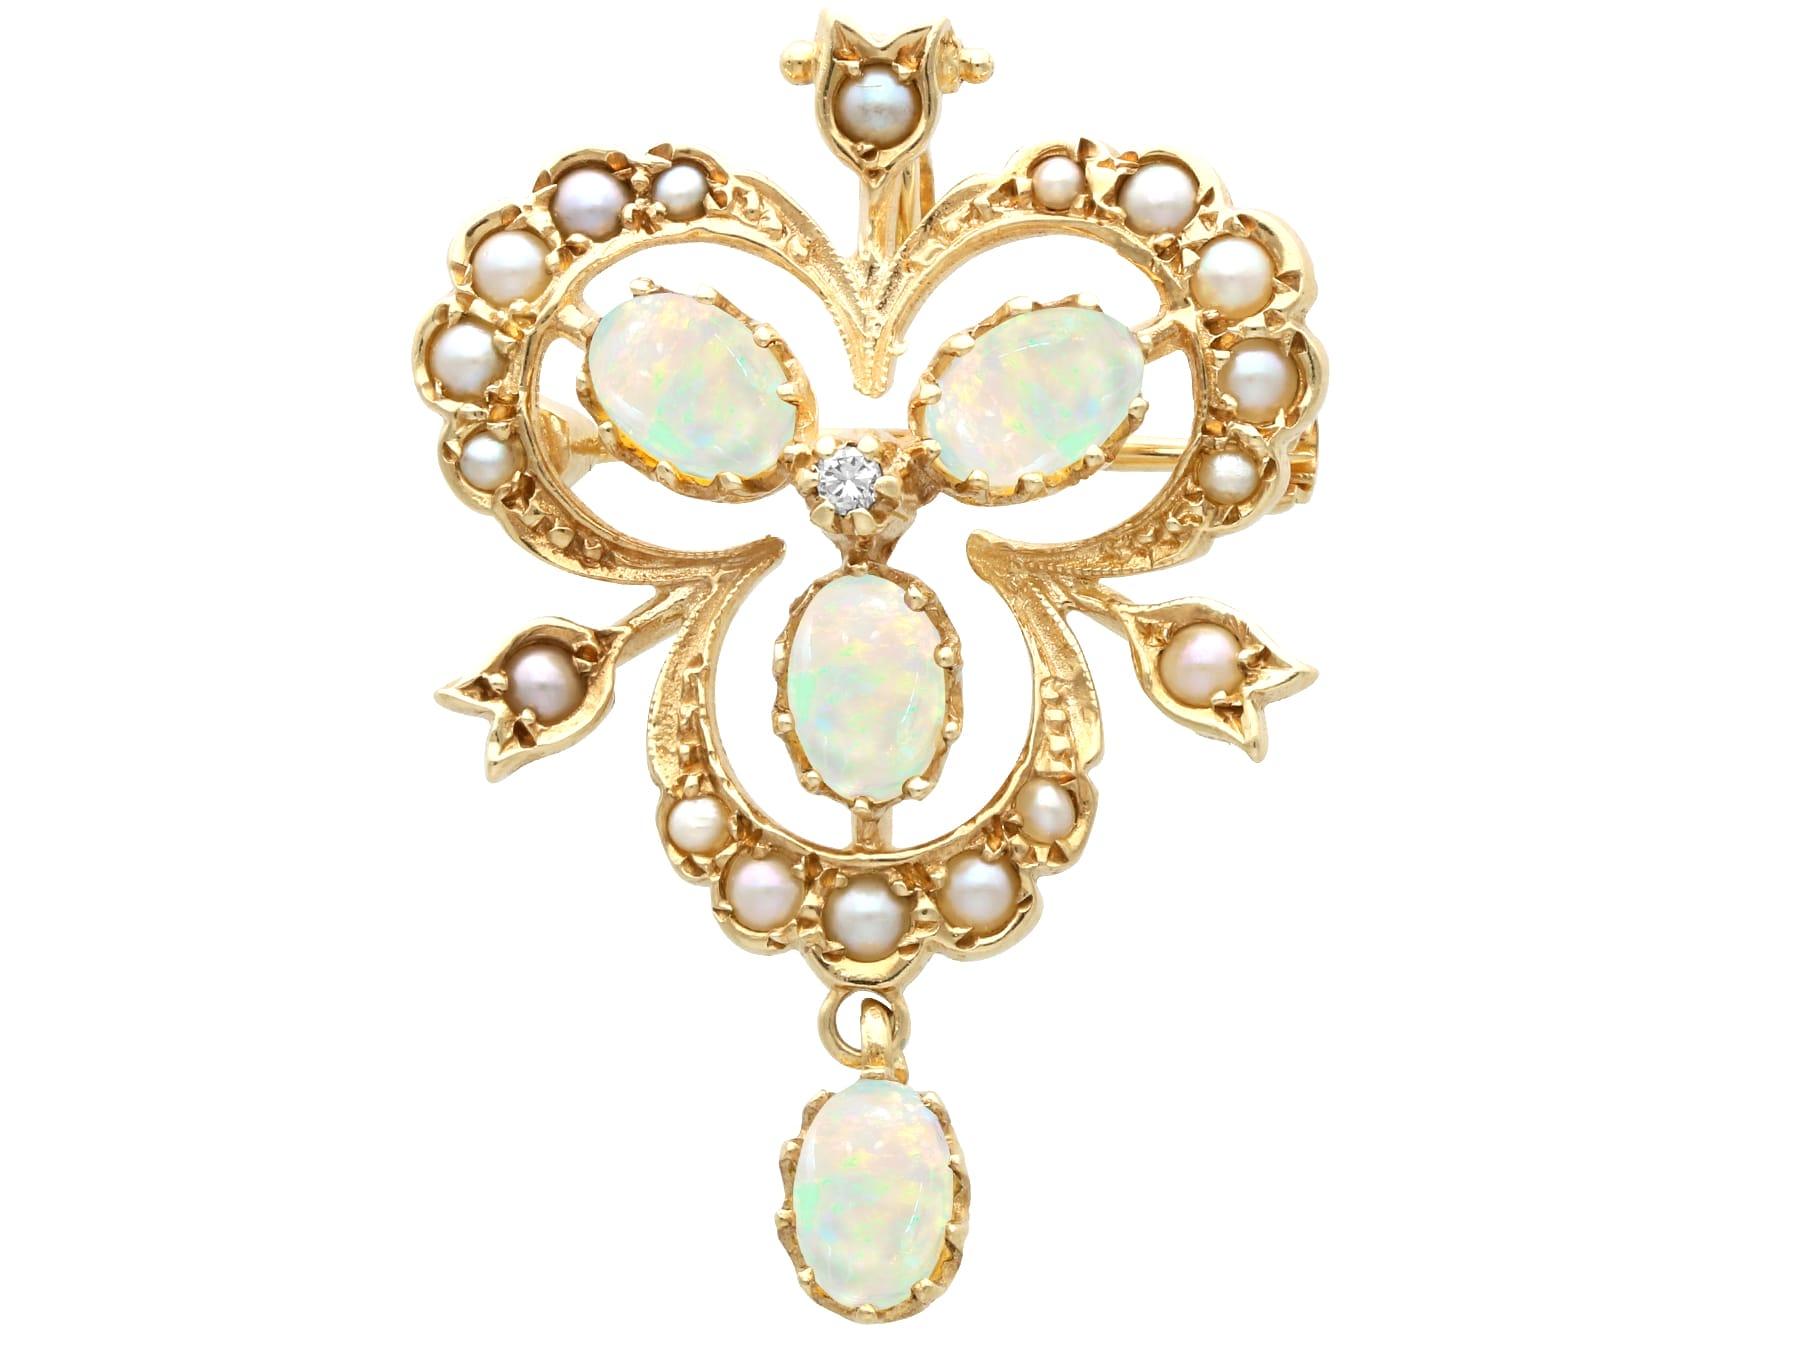 Victorian Style 1.60Ct Opal Pearl and Diamond 9K Yellow Gold Pendant/Brooch In Excellent Condition For Sale In Jesmond, Newcastle Upon Tyne